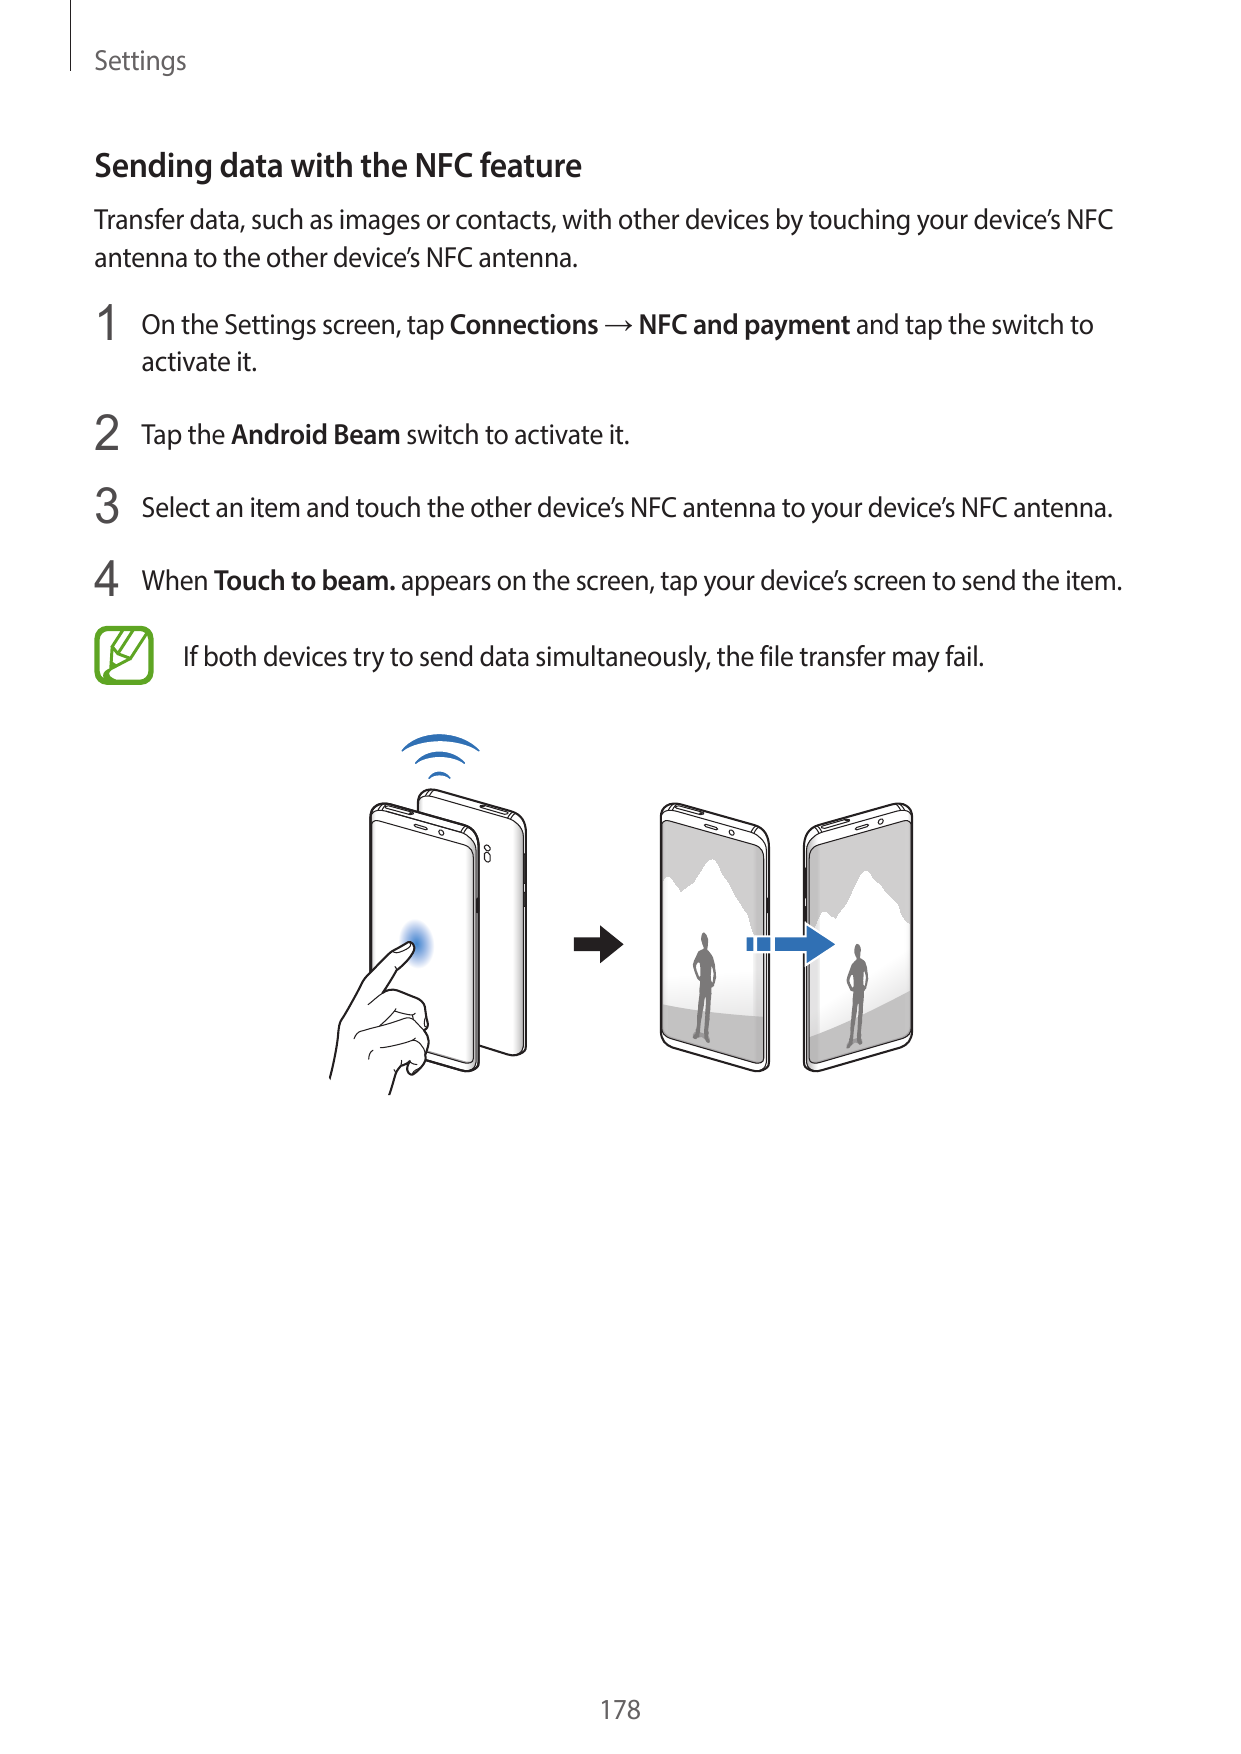 SettingsSending data with the NFC featureTransfer data, such as images or contacts, with other devices by touching your device’s